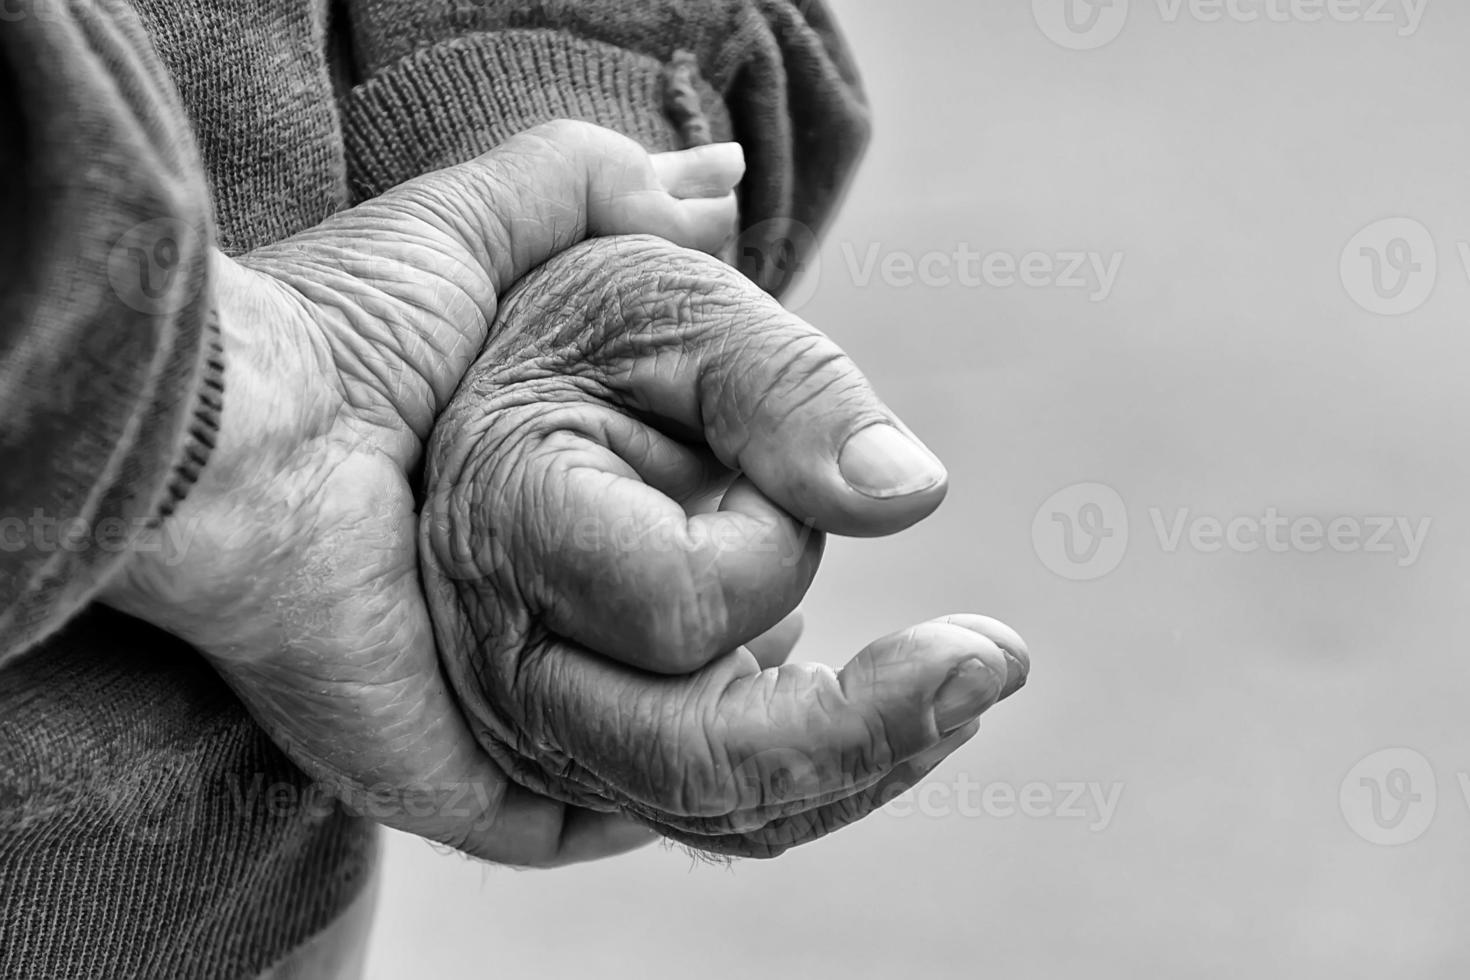 Farmer Hands of old man who worked hard in his life photo